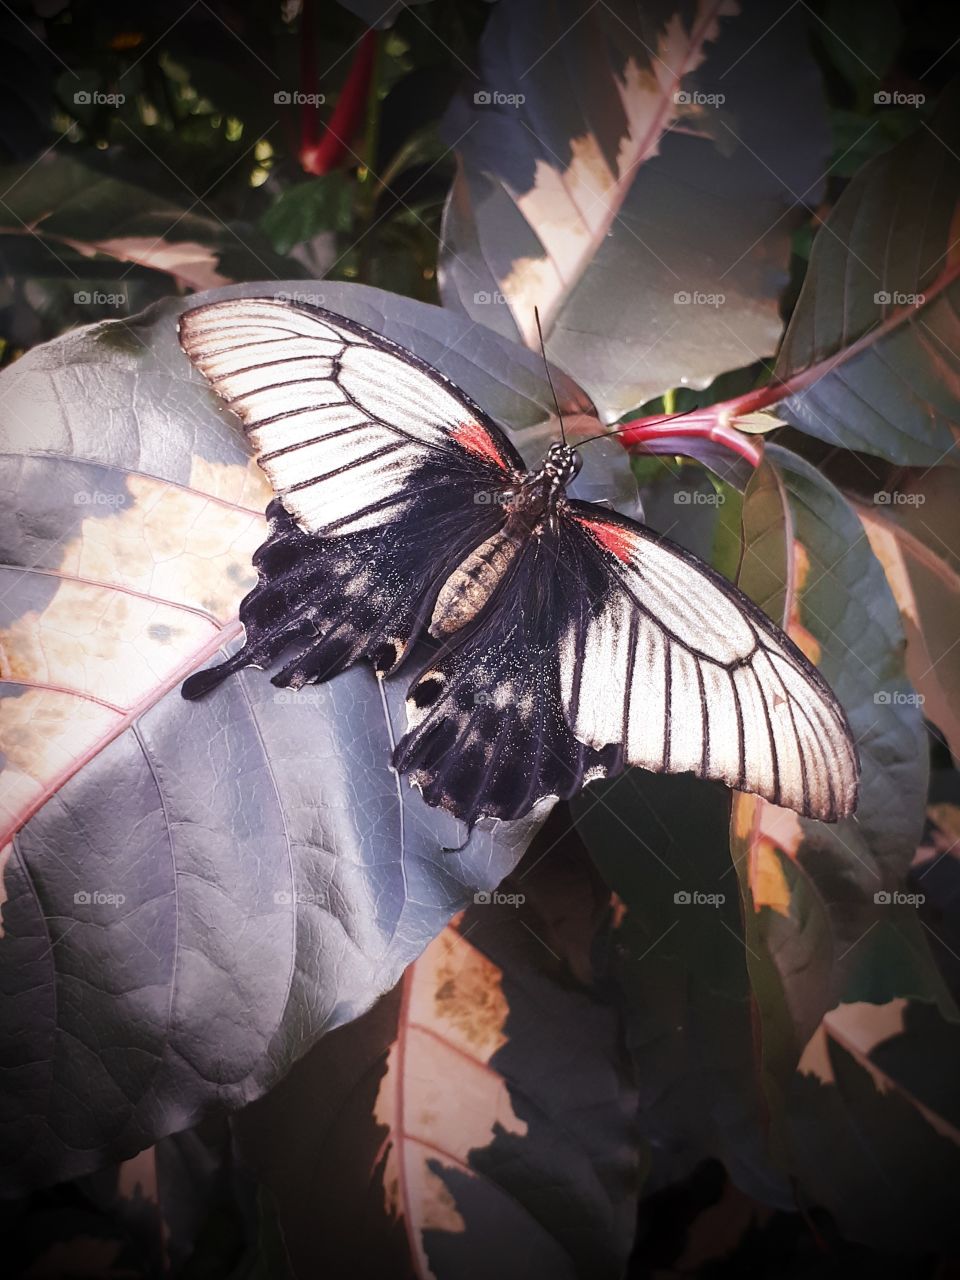 This I took at the Calgary zoo. it reminds me how relaxing life can be sitting in the butterfly nest